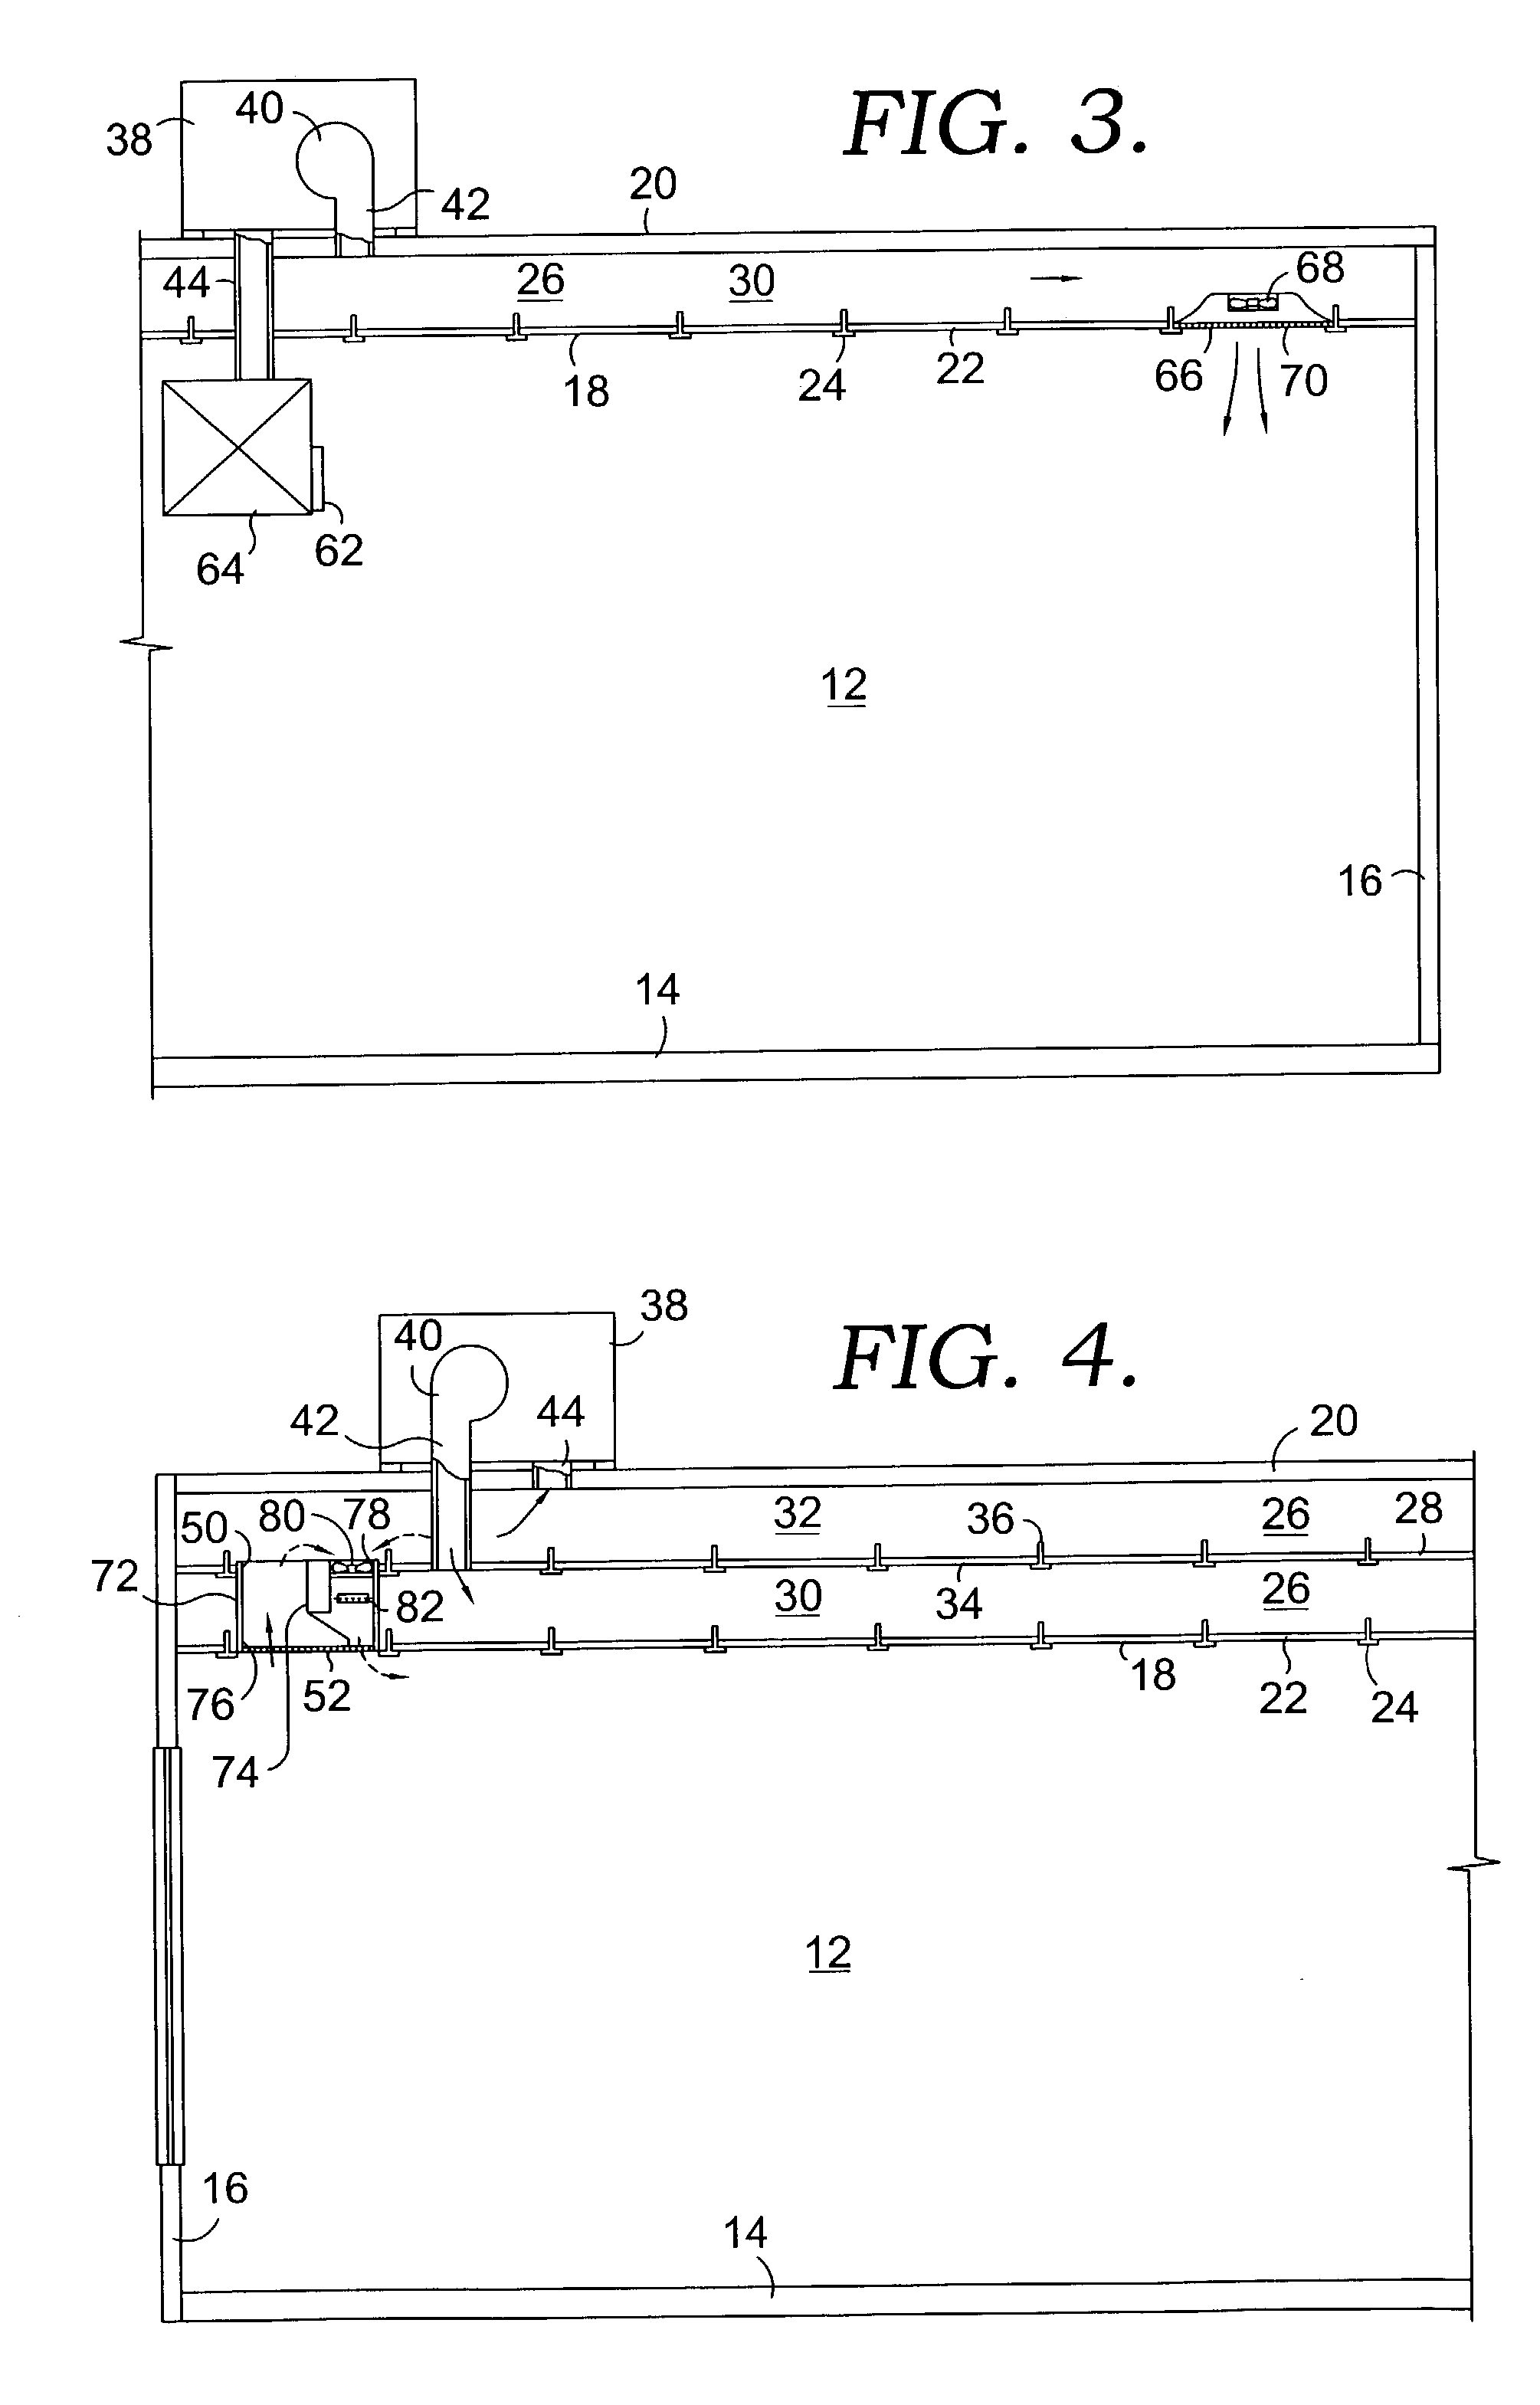 Method and apparatus for delivering conditioned air using dual plenums